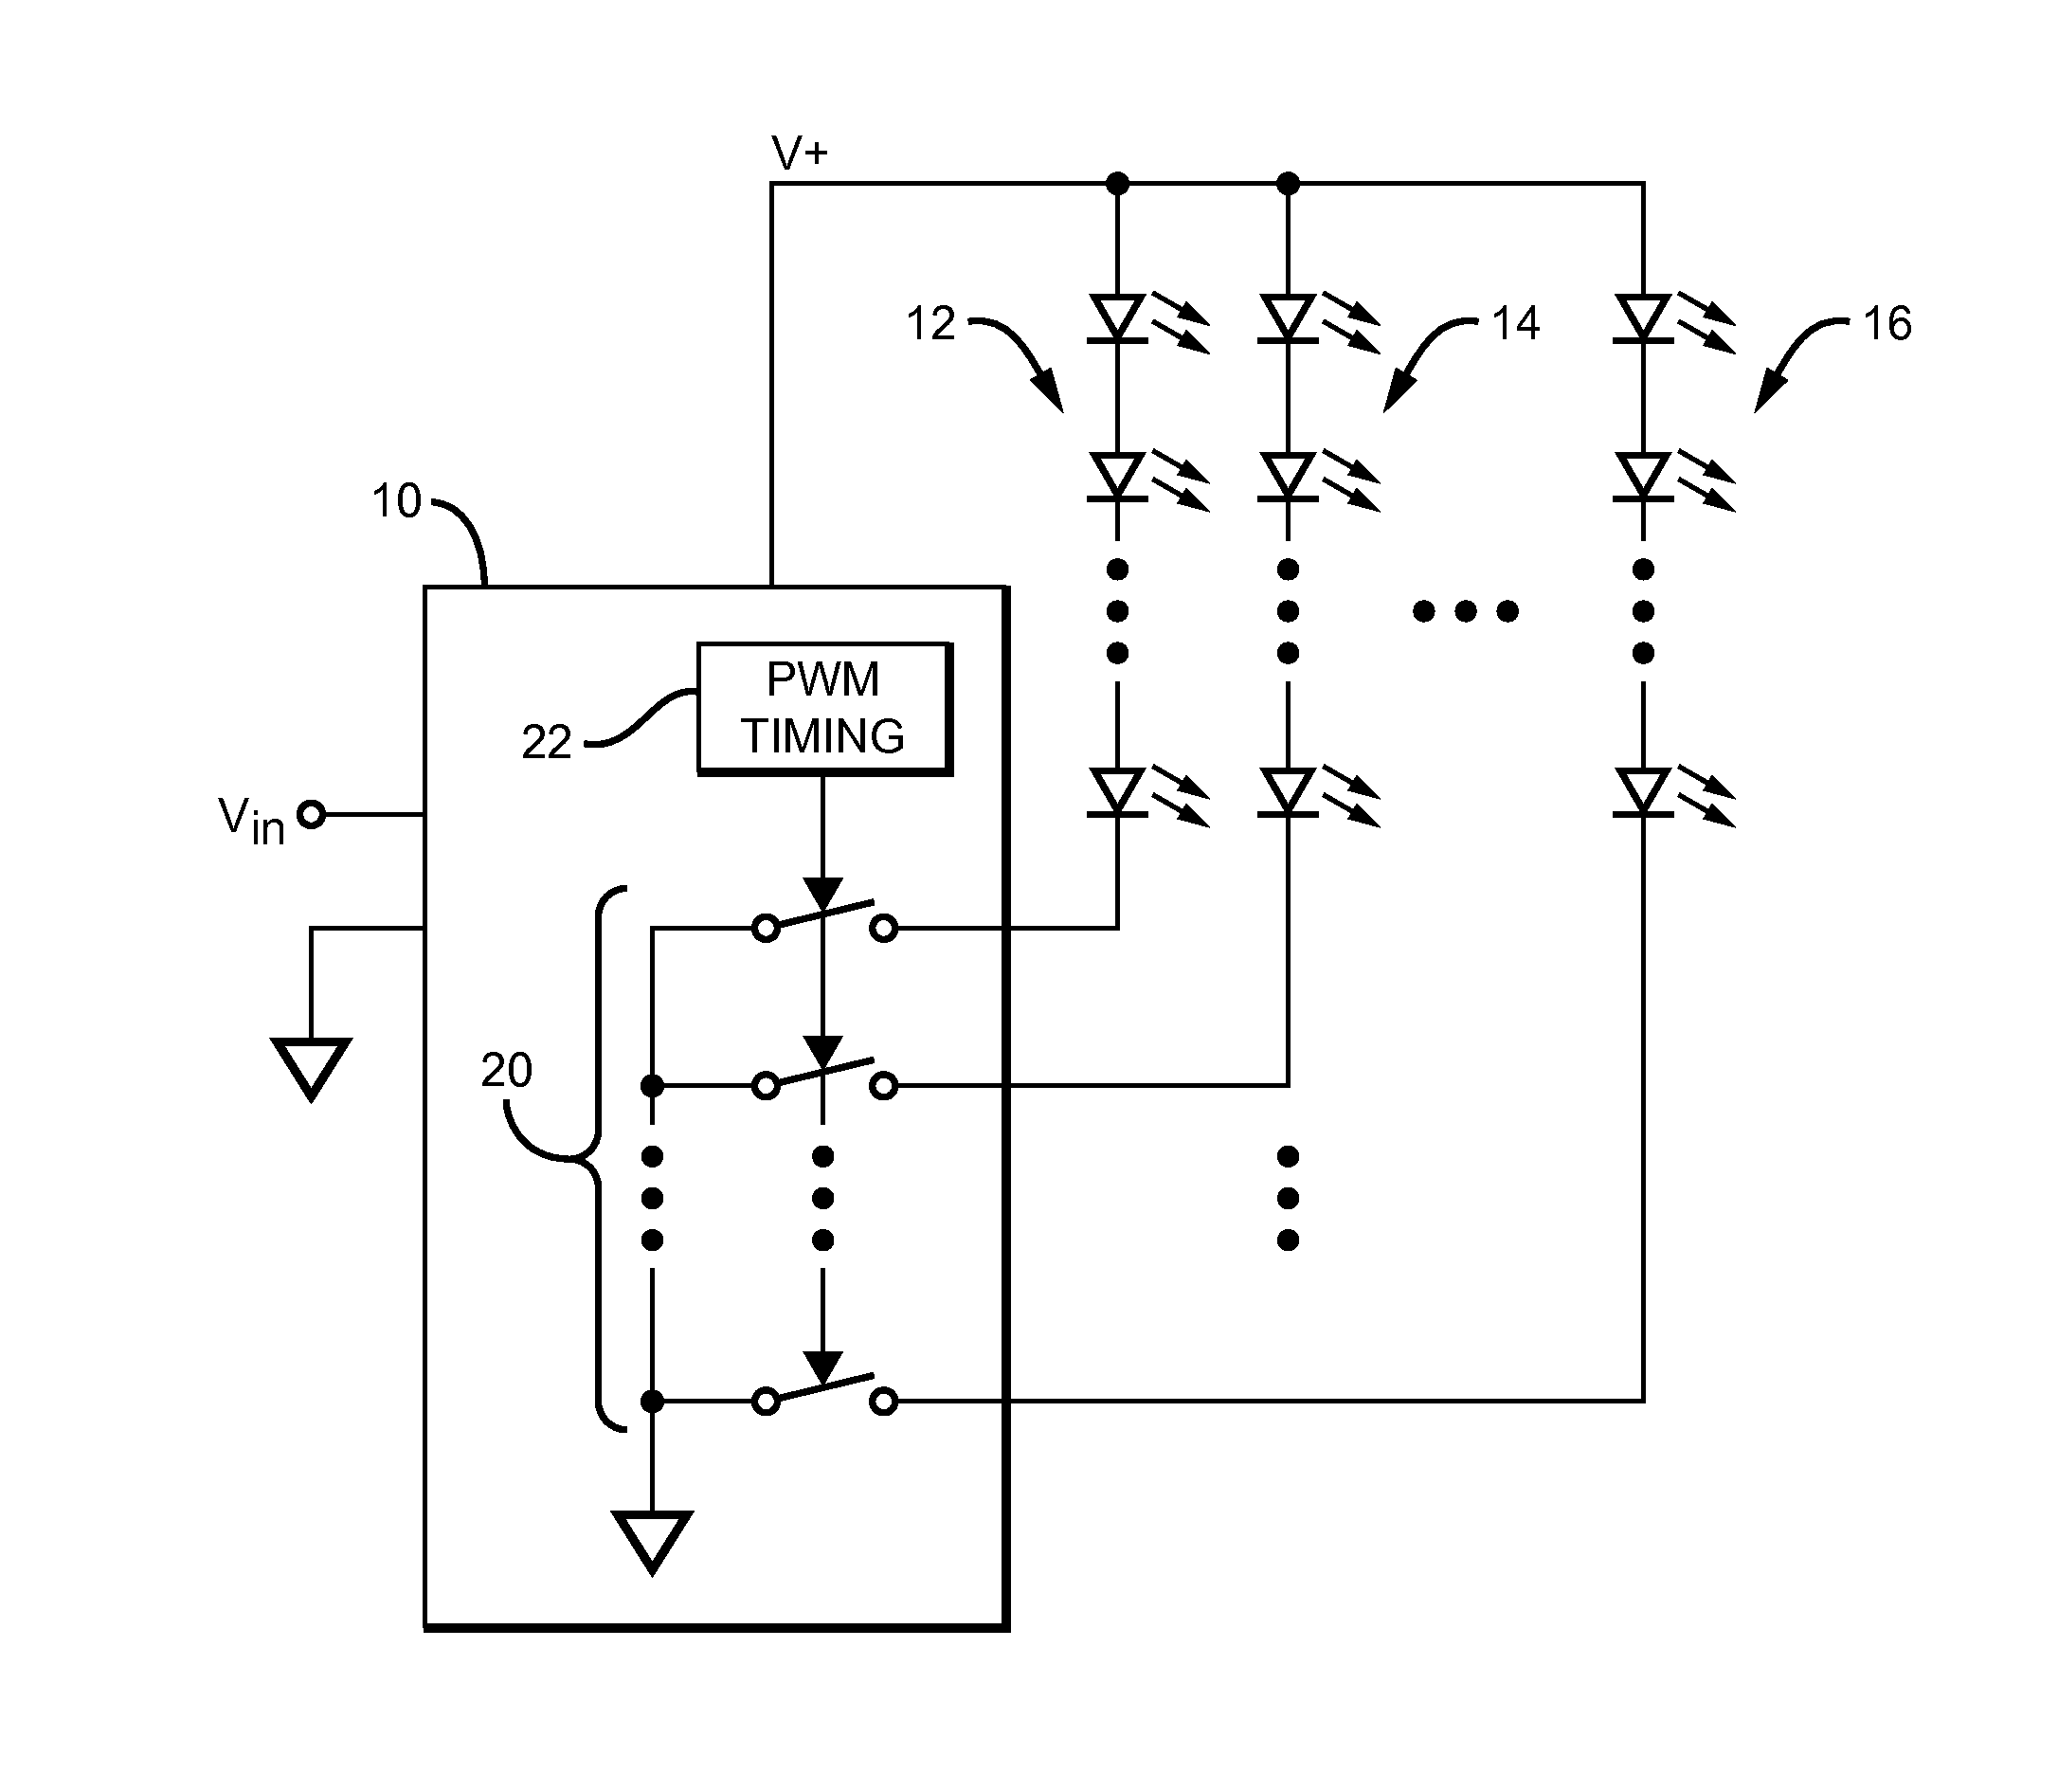 Multi-string LED driving method and system